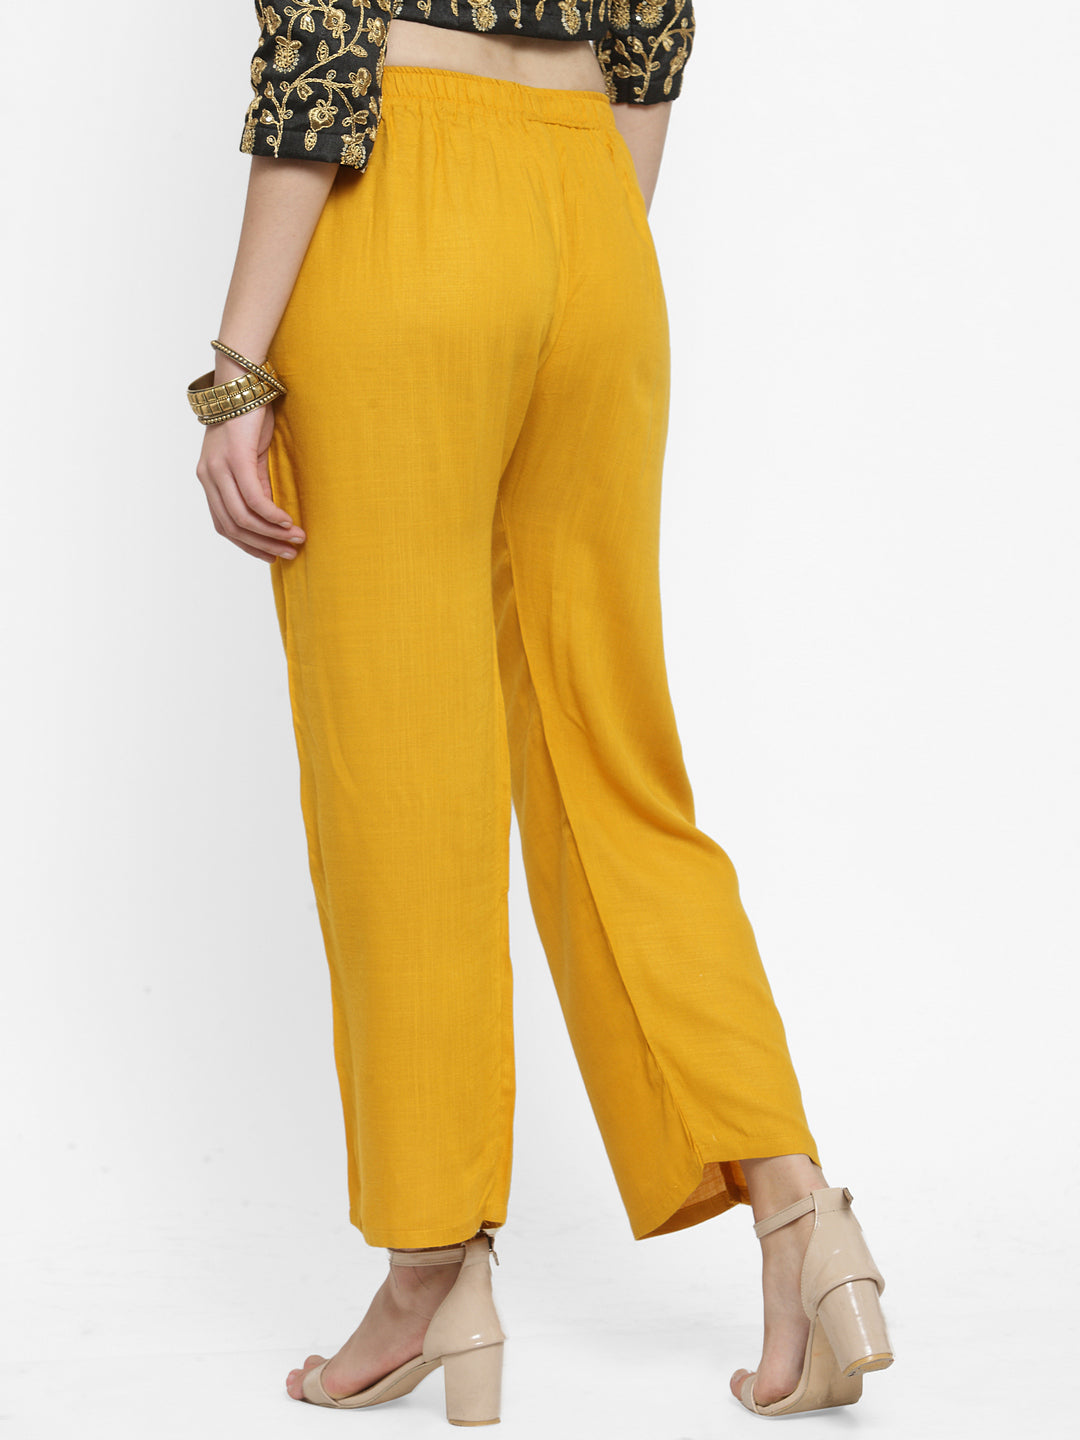 Women's Solid Fawn & Mustard Rayon Palazzo (Pack Of 2) - Wahe-NOOR